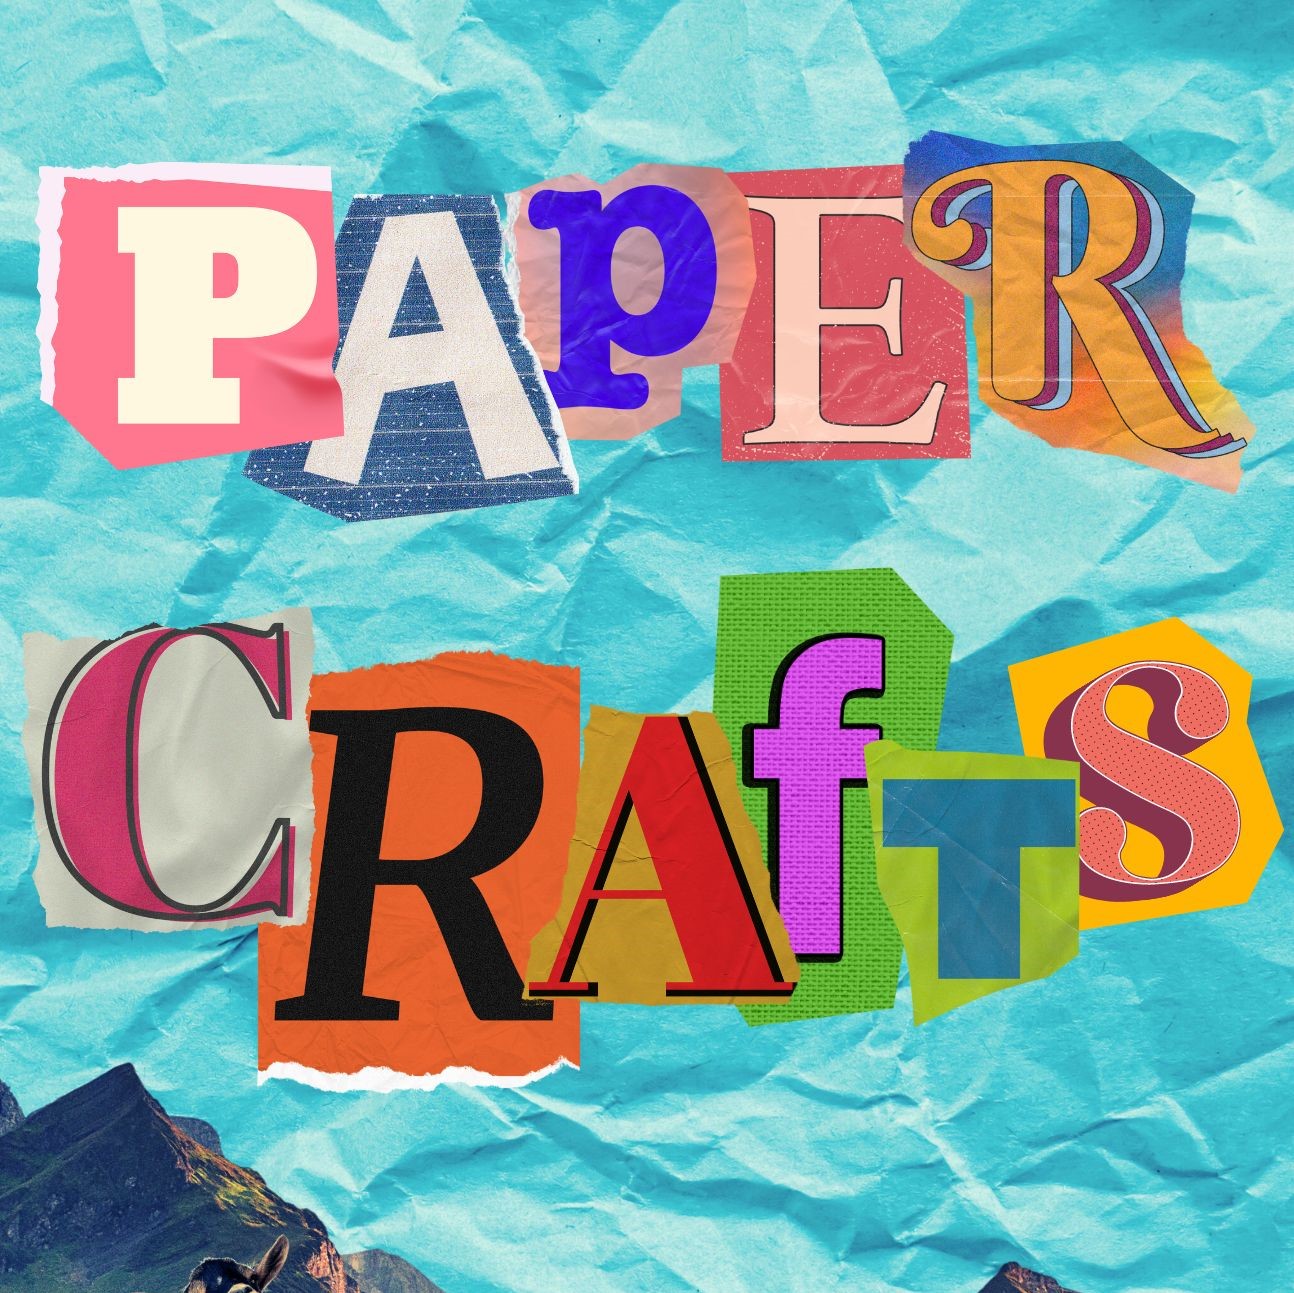 Image collage spelling out paper crafts